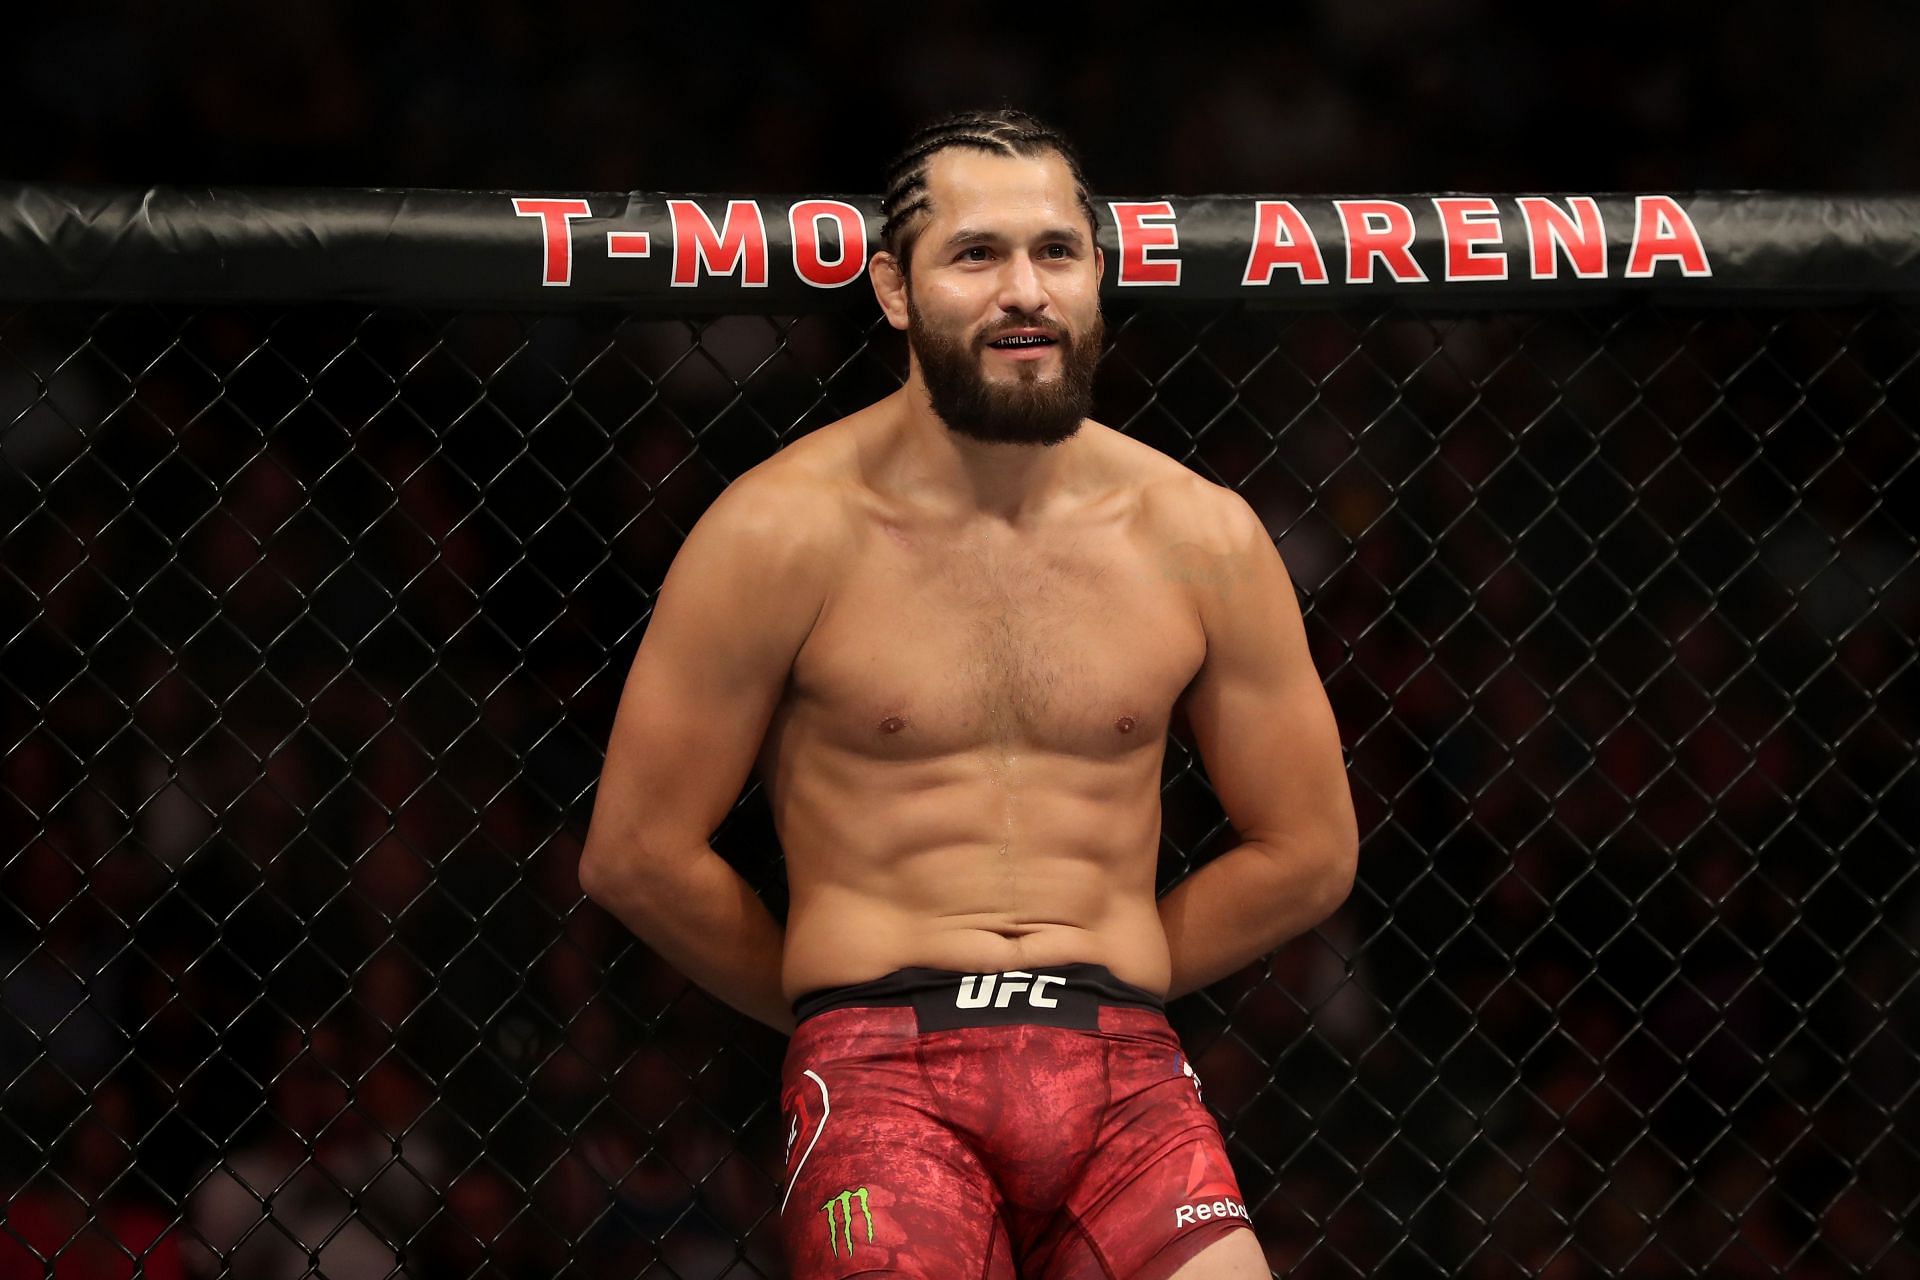 Conor McGregor and Jorge Masvidal would probably cause fireworks as TUF coaches